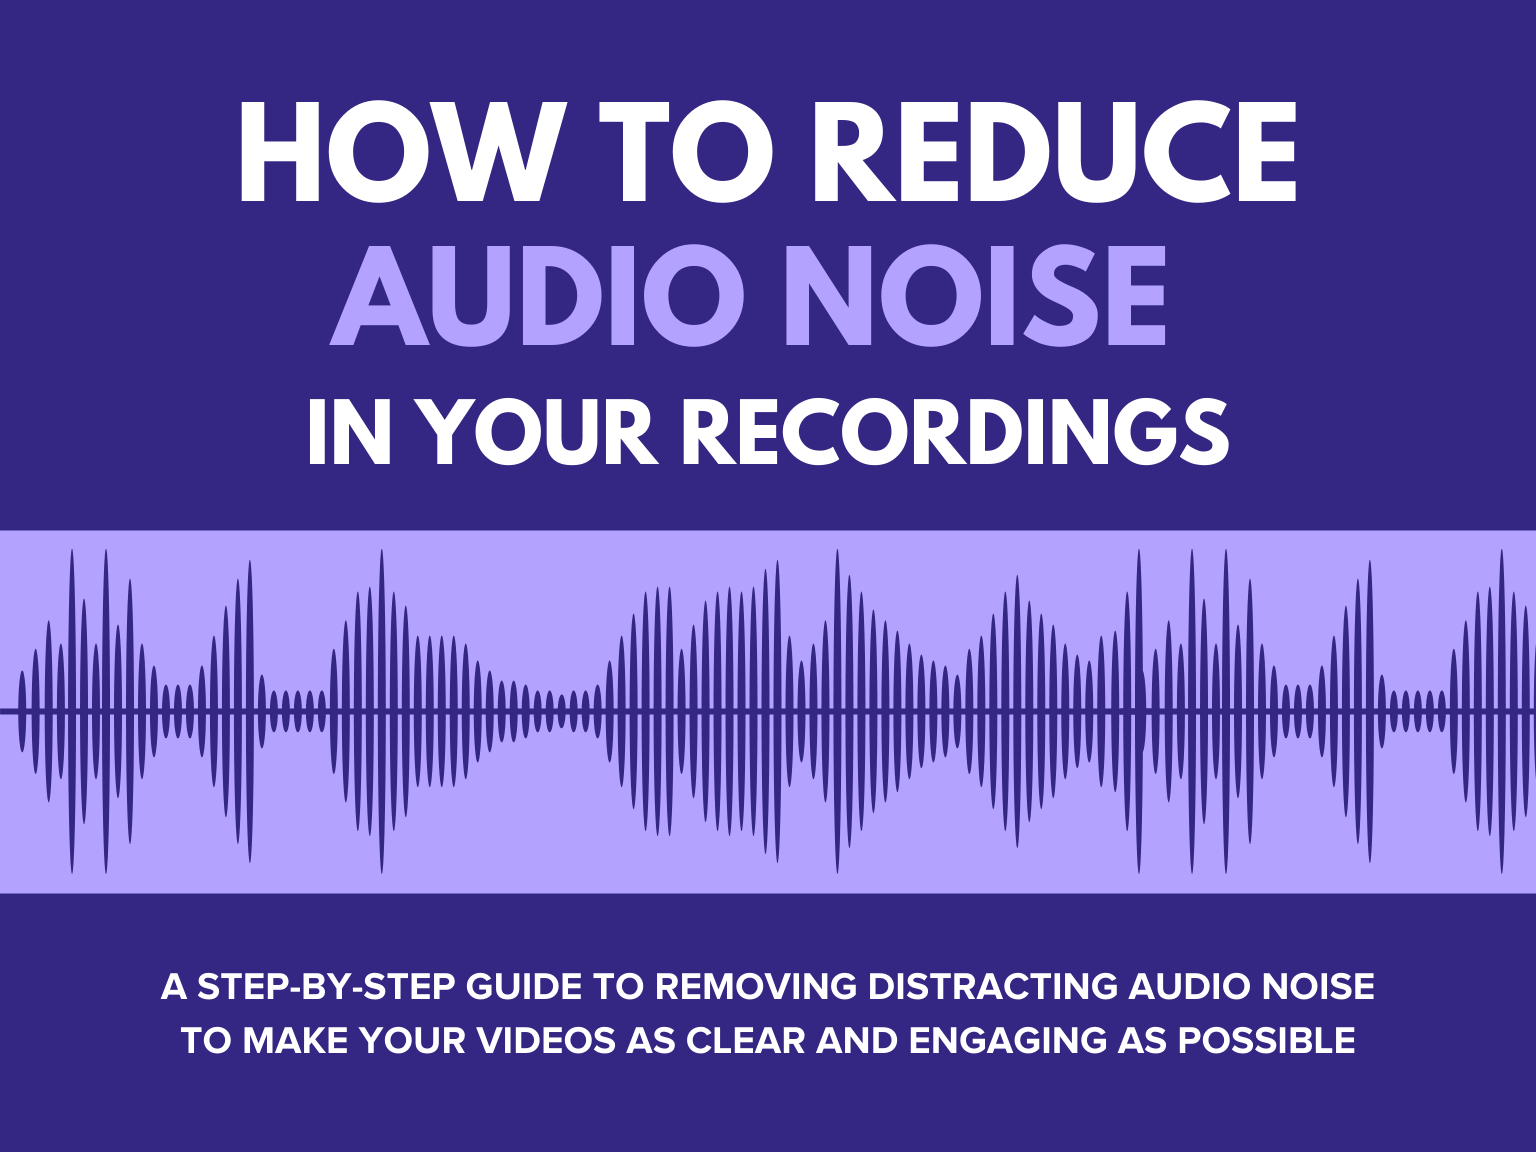 How To Reduce Audio Noise In Your Recordings | The Techsmith Blog